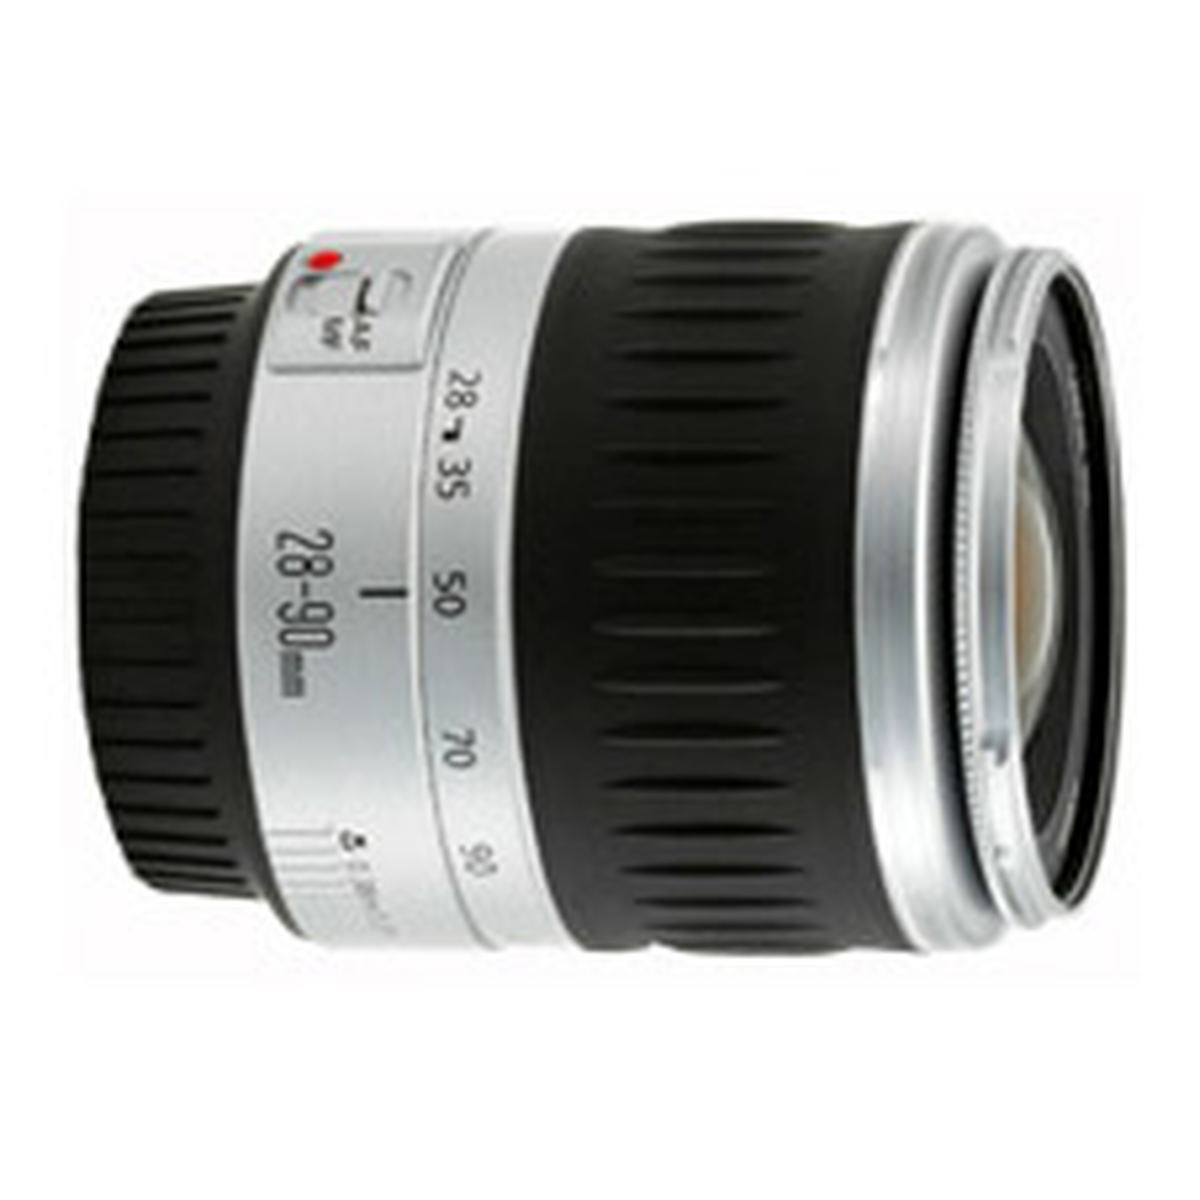 Canon EF 28-90mm f/4-5.6 II USM Specifications and Opinions JuzaPhoto